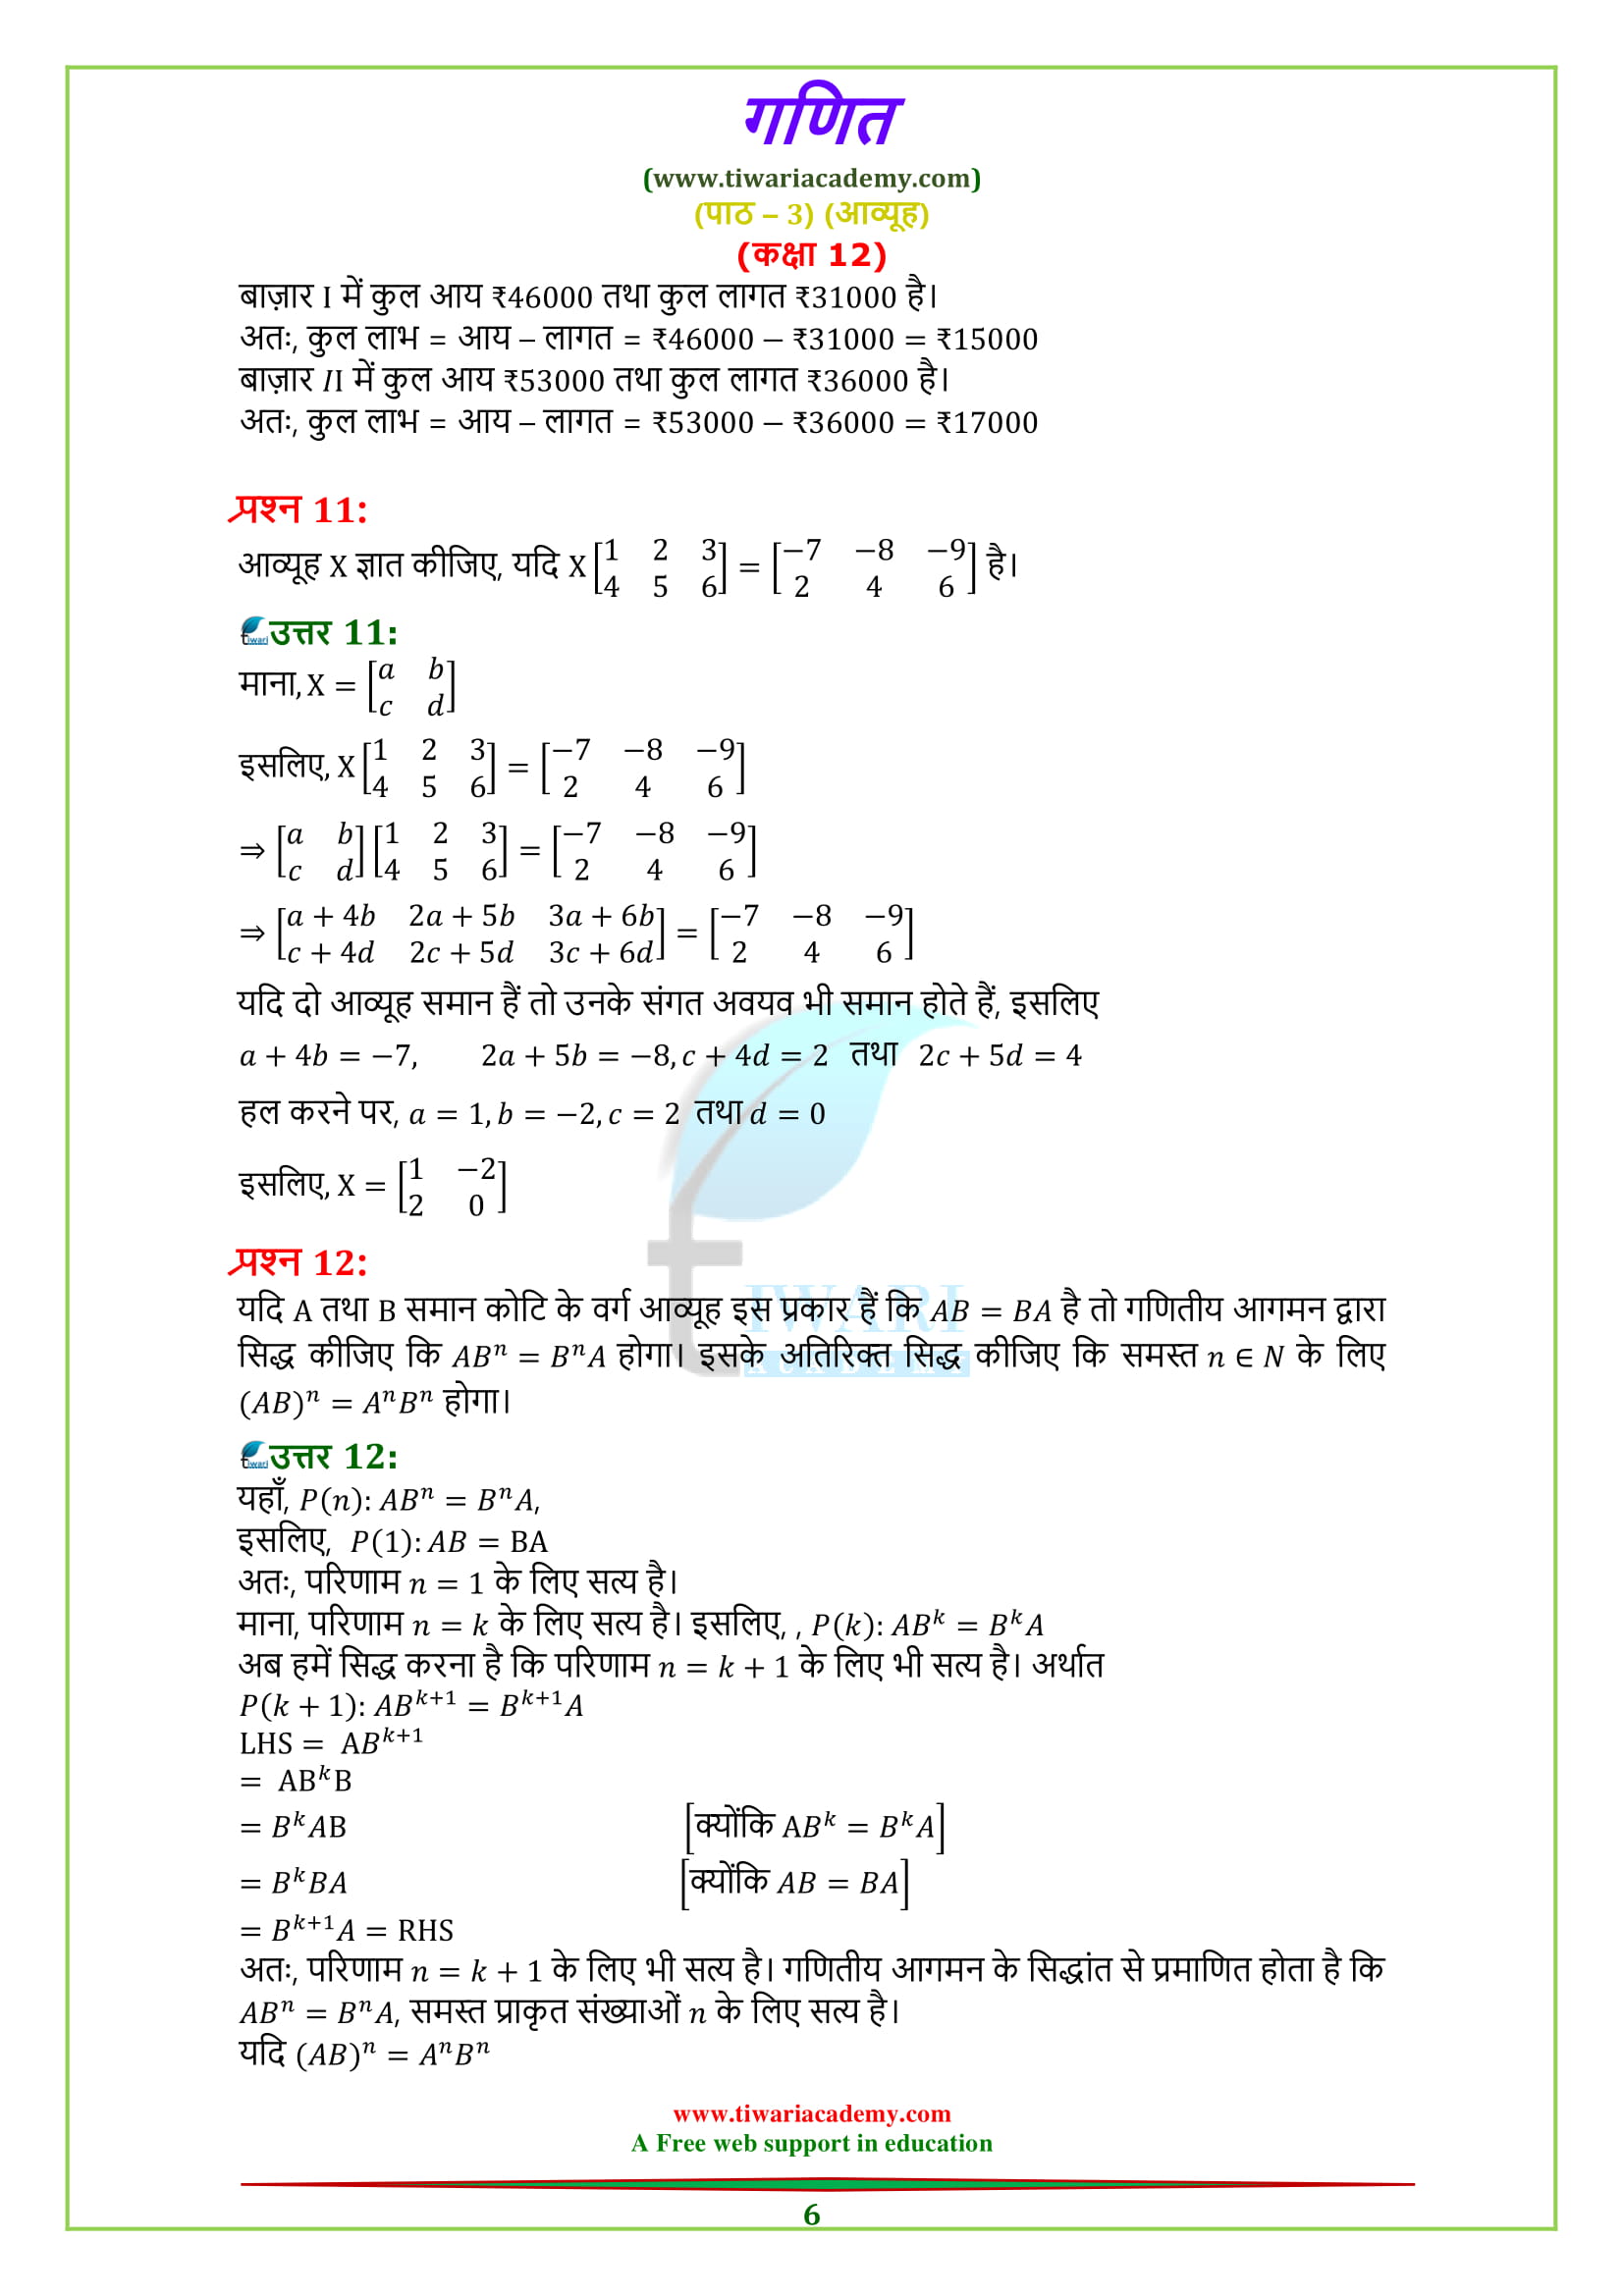 Class 12 Maths Chapter 3 Miscellaneous Exercise 3 Matrices guide in Hindi Questions 11, 12, 13, 14, 15